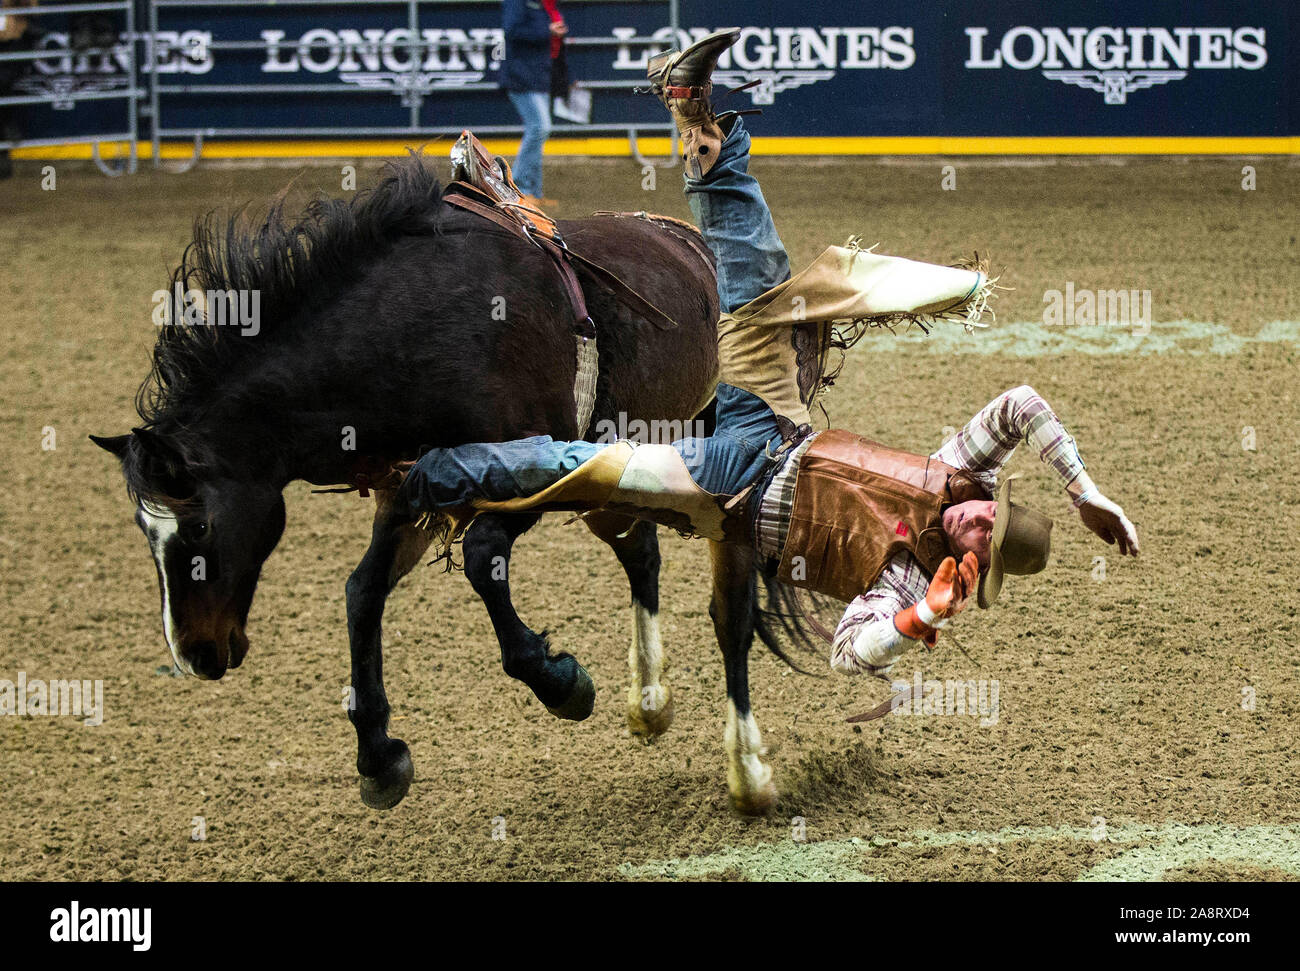 Toronto, Canada. 10th Nov, 2019. Cowboy Ritchie Welch of Canada falls down from his horse during the Bareback competition of the Rodeo at the 2019 Royal Agricultural Winter Fair in Toronto, Canada, Nov. 10, 2019. About 30 riders from Australia, Brazil, Canada and the United States took part in this annual event. Credit: Zou Zheng/Xinhua/Alamy Live News Stock Photo